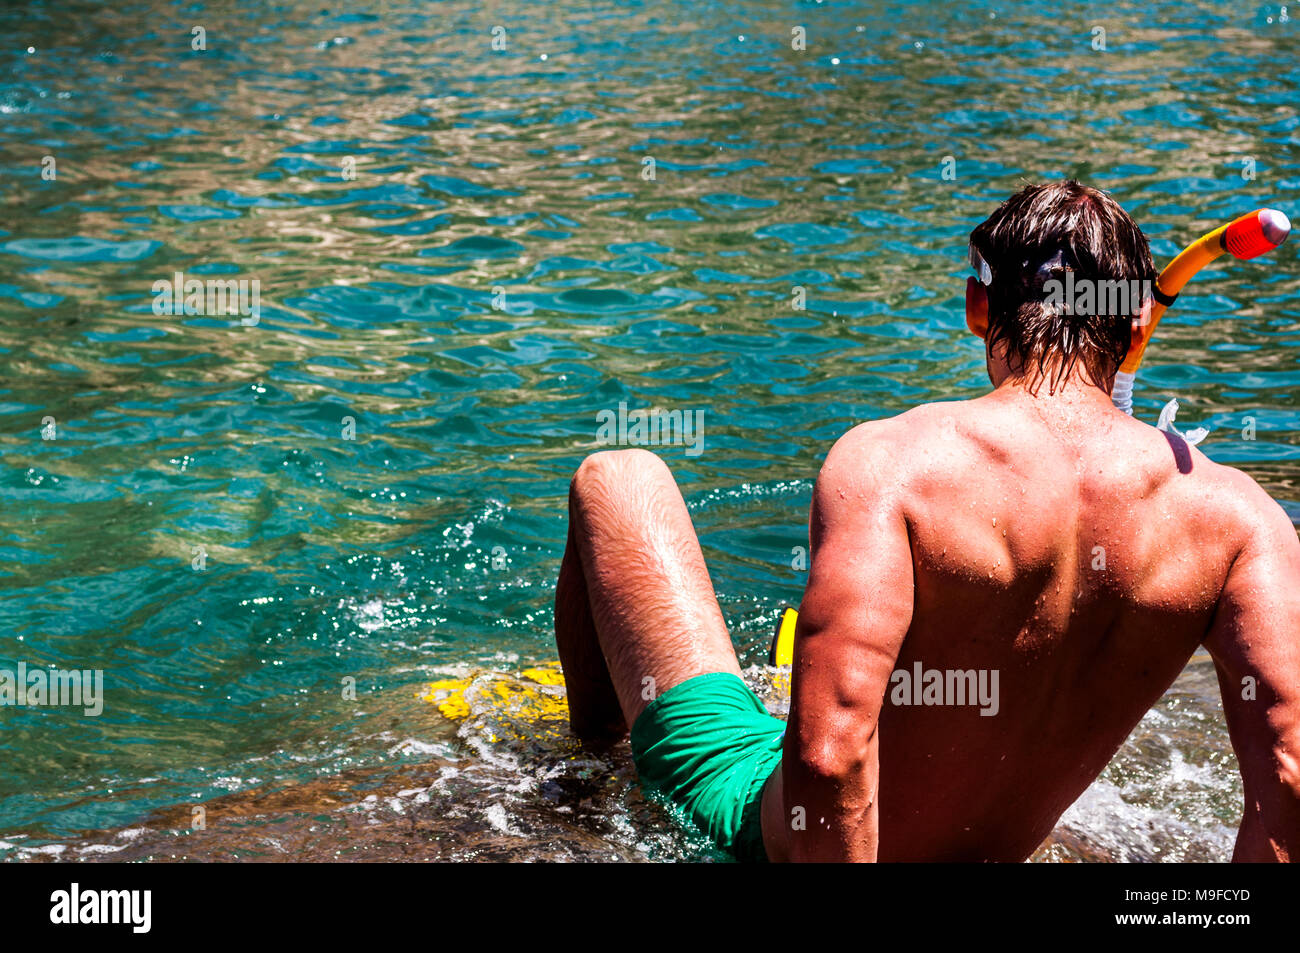 Man snorkeling in tropical water. Man preparing to dive with his snorkeling equipment Stock Photo